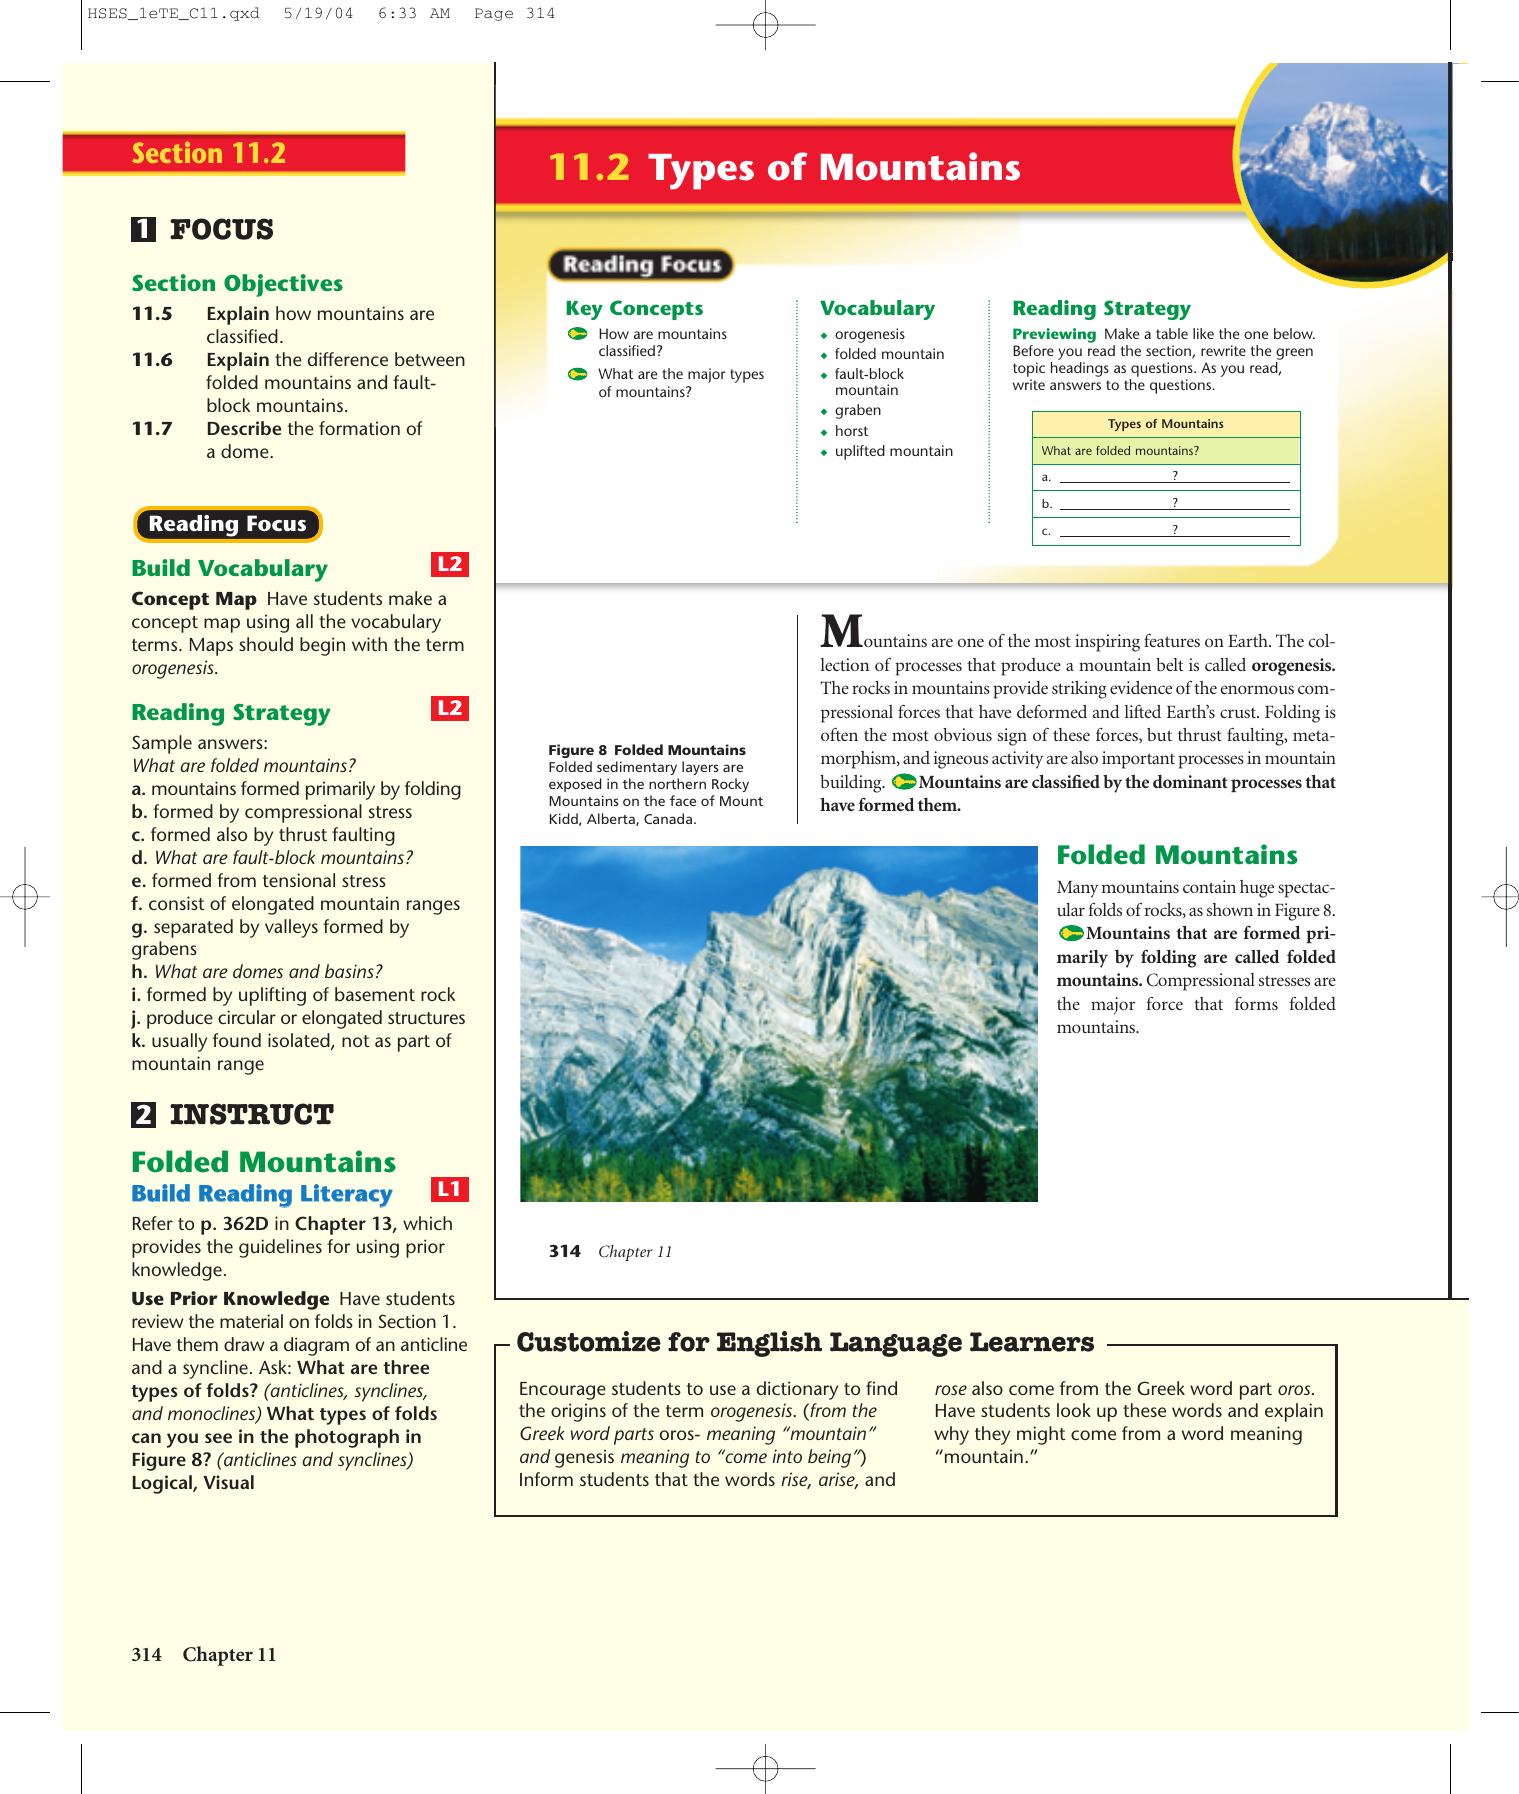 primary homework help types of mountains